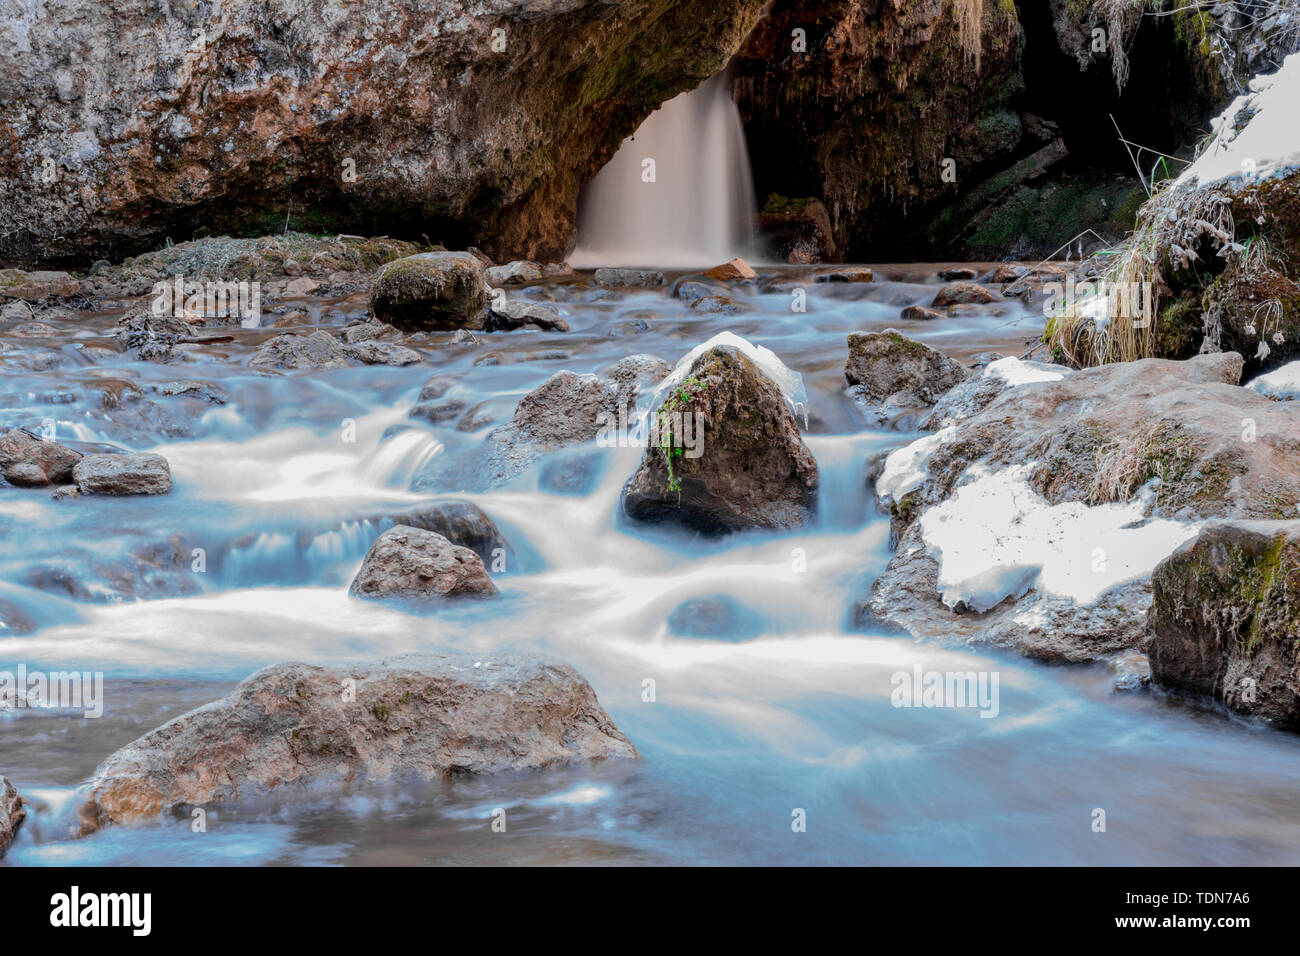 Cold mountain river flows between stones with snow and ice, selective focus, waterfall in the background, long exposure, Karachay-Cherkess Republic. Stock Photo